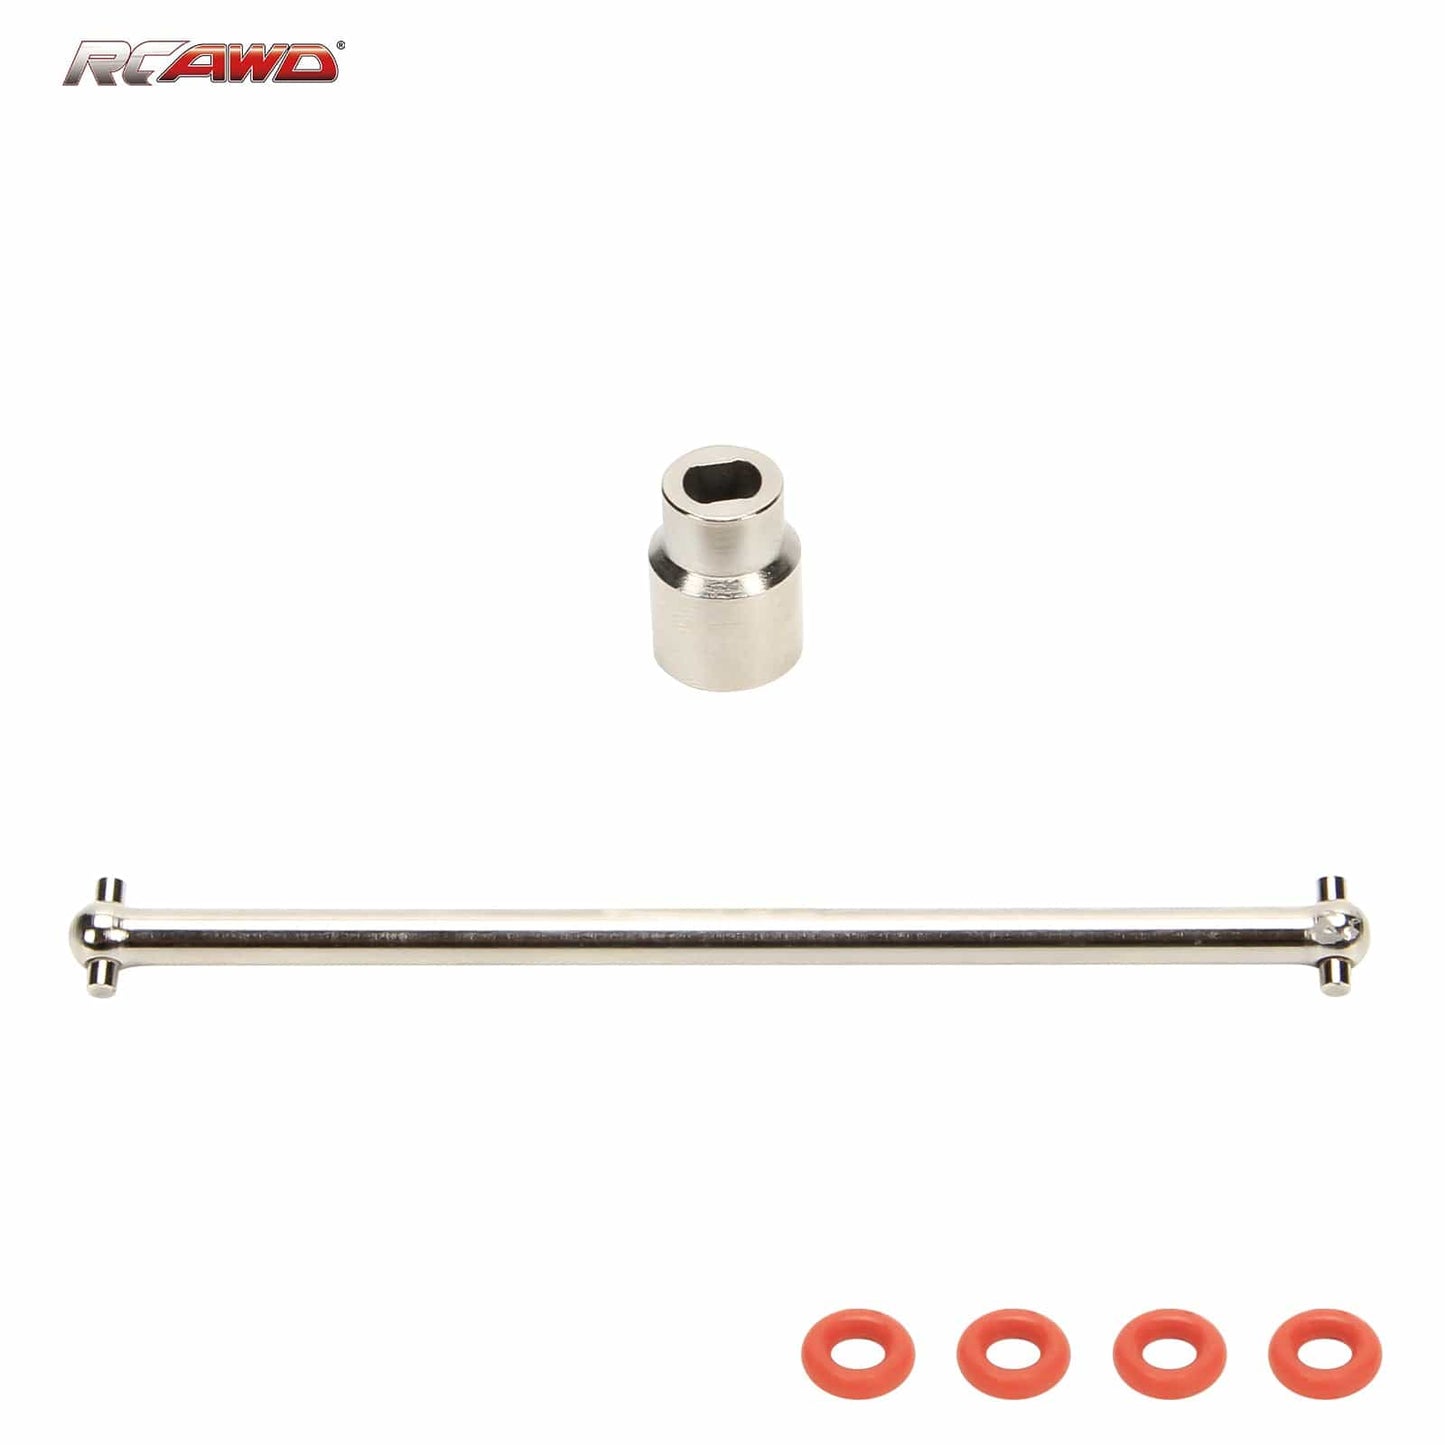 RCAWD Axial AXI31627 RCAWD Axial AXI31627 Upgrades Drive Shaft  for Yeti Jr Can-Am Maverick